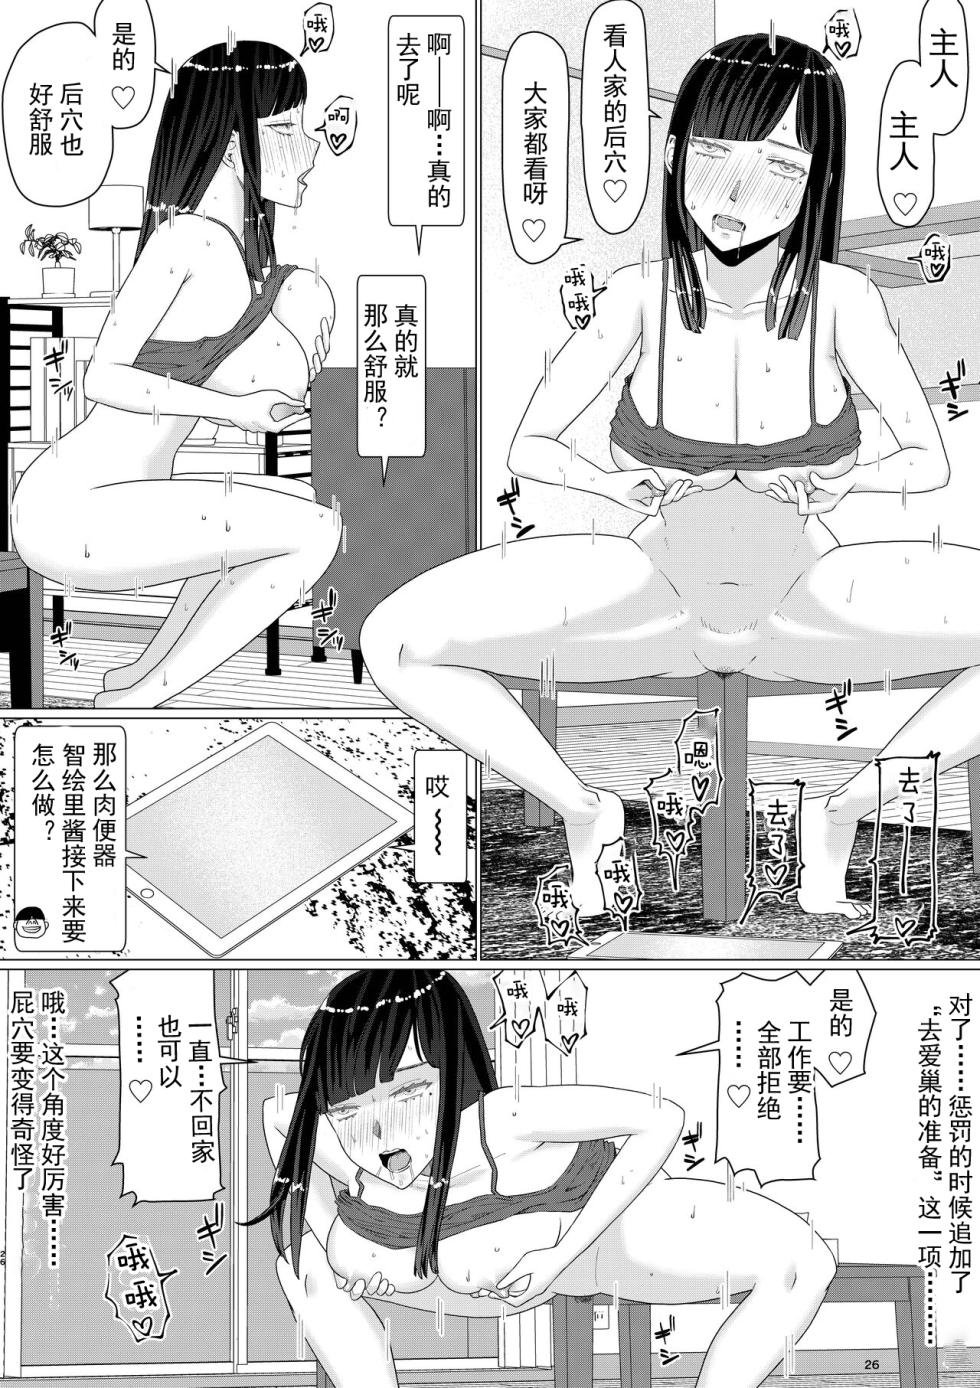 Chieri can't lose! 3 -Perverted toilet wife who fertilizes anyone's sperm with her husband's official approval- Volume 2 [Chinese] [超勇漢化組] - Page 27